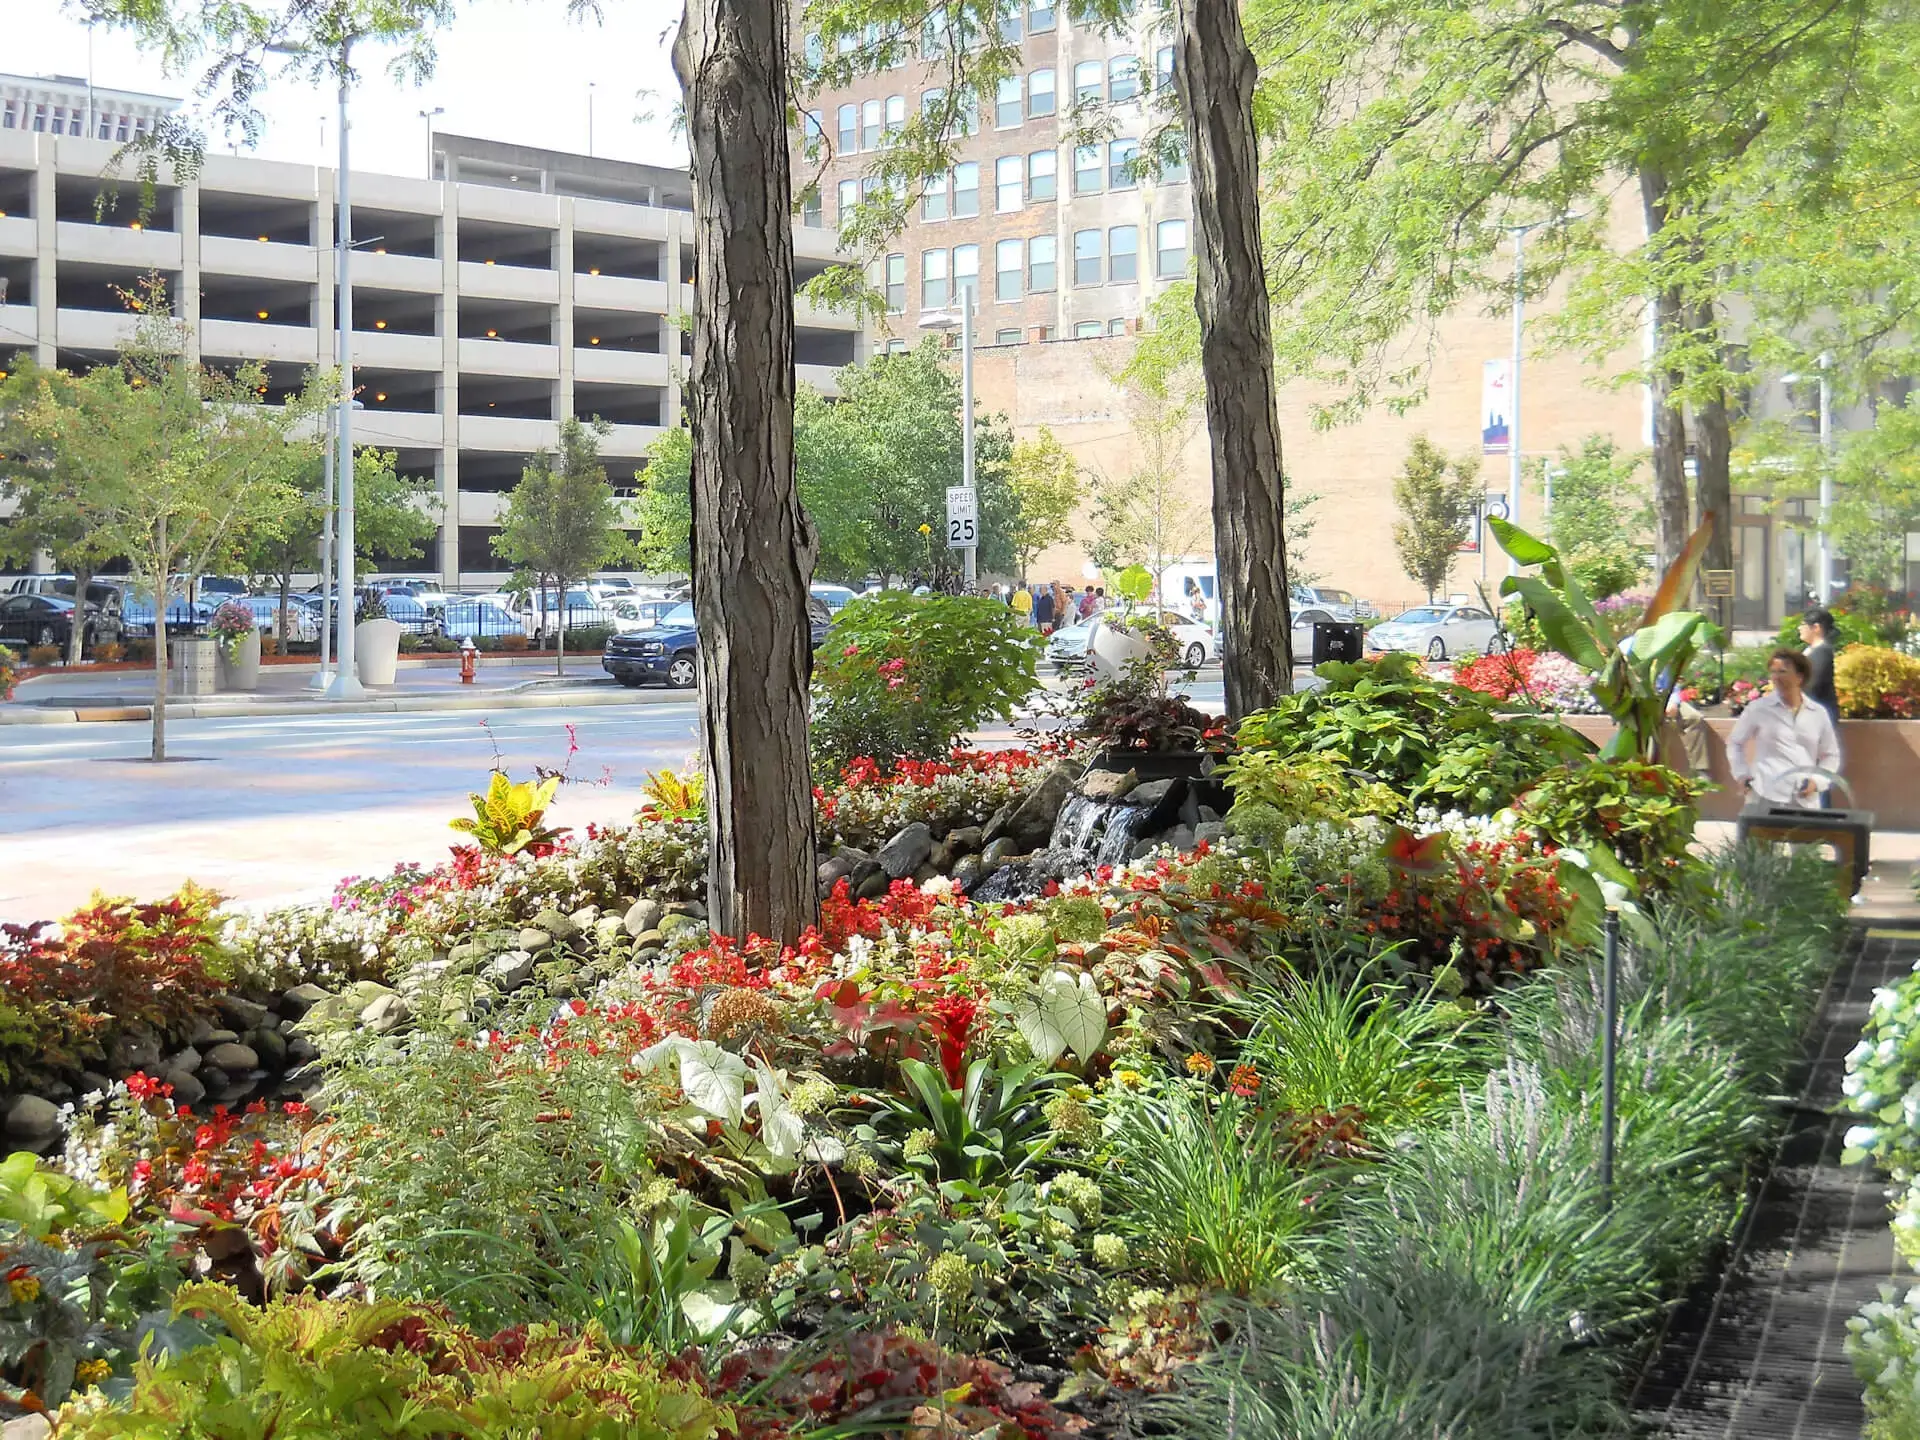 Waterfall with Rocks, Flowers, Shrubs, and Trees surrounding in a City